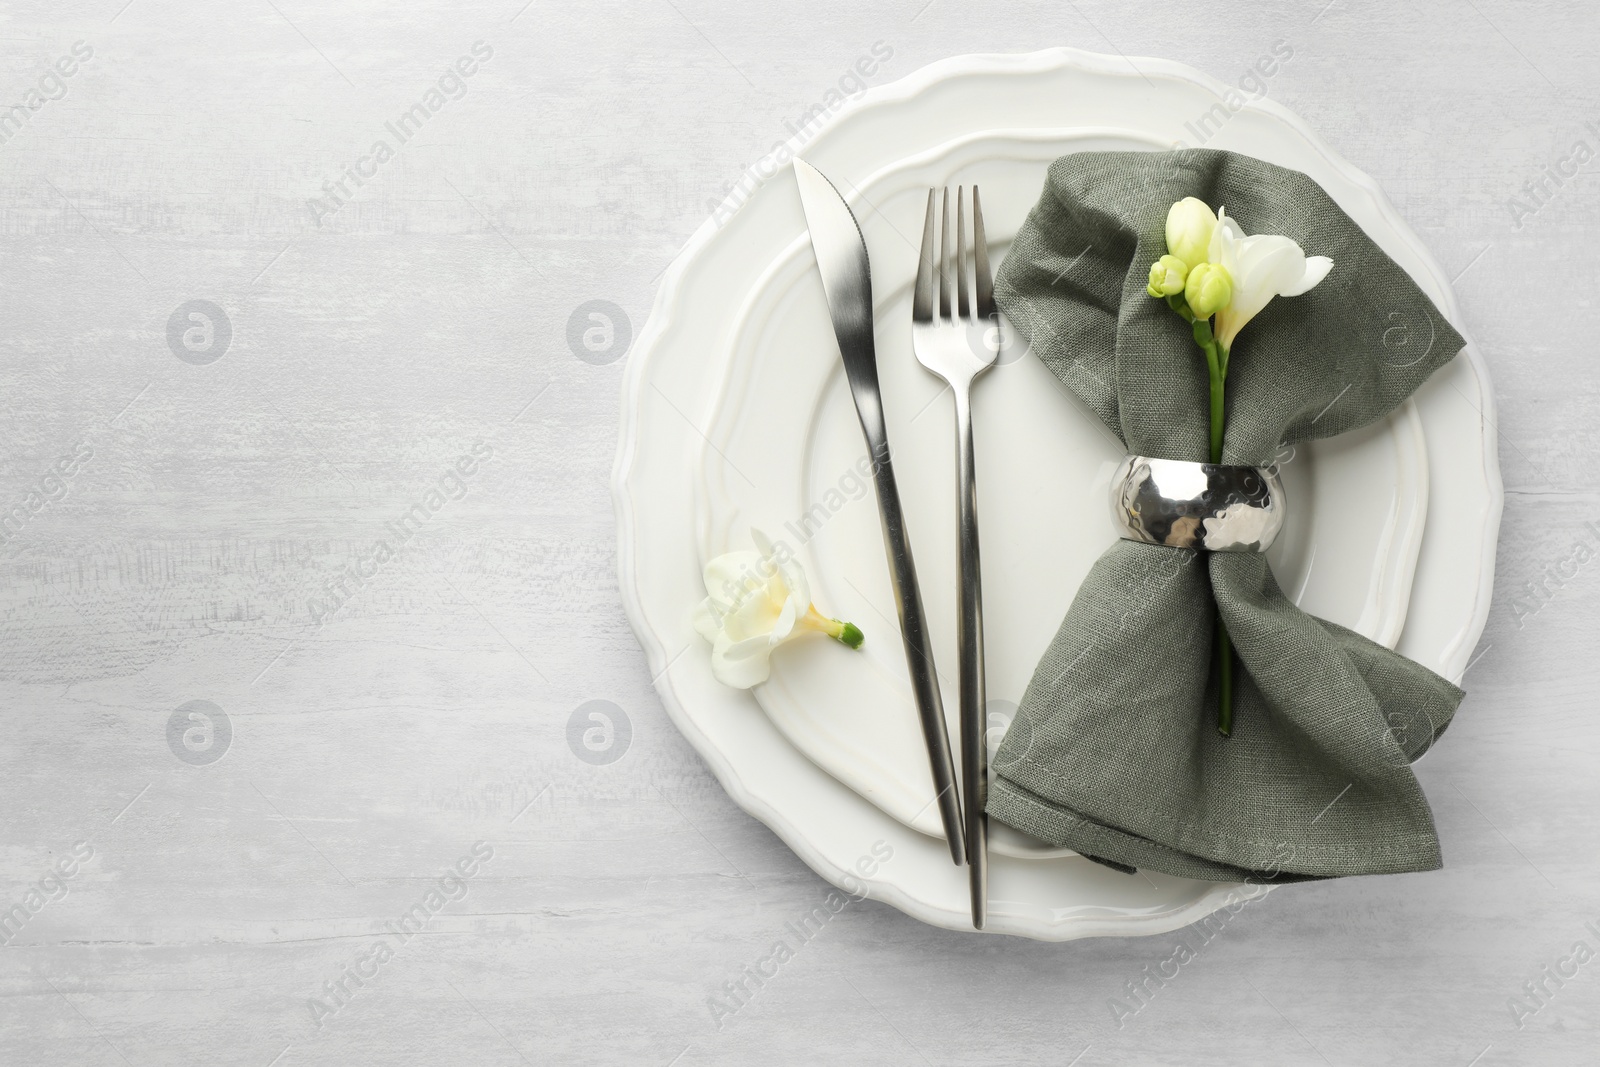 Photo of Stylish setting with cutlery, napkin, flowers and plates on light textured table, top view. Space for text